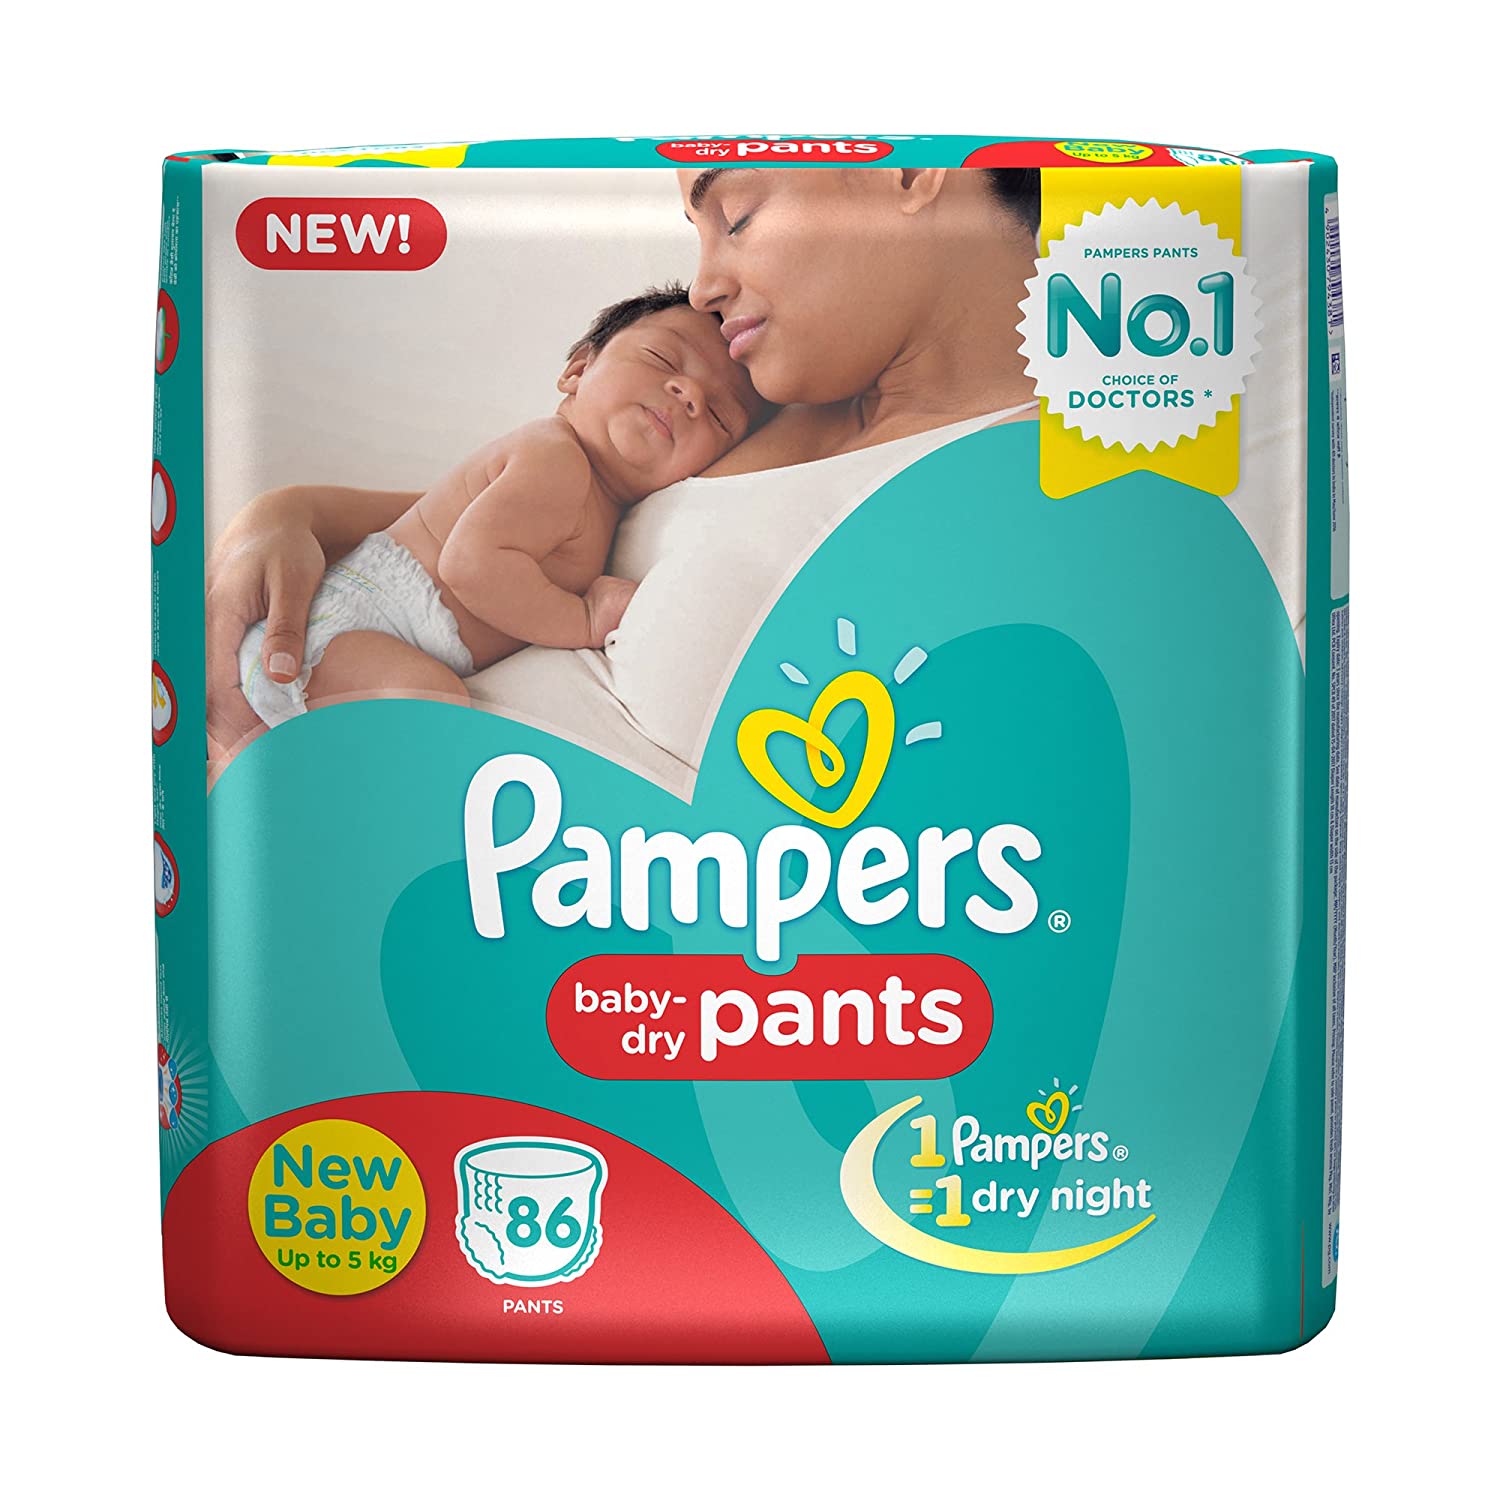 Babes In Diapers Baby Fever